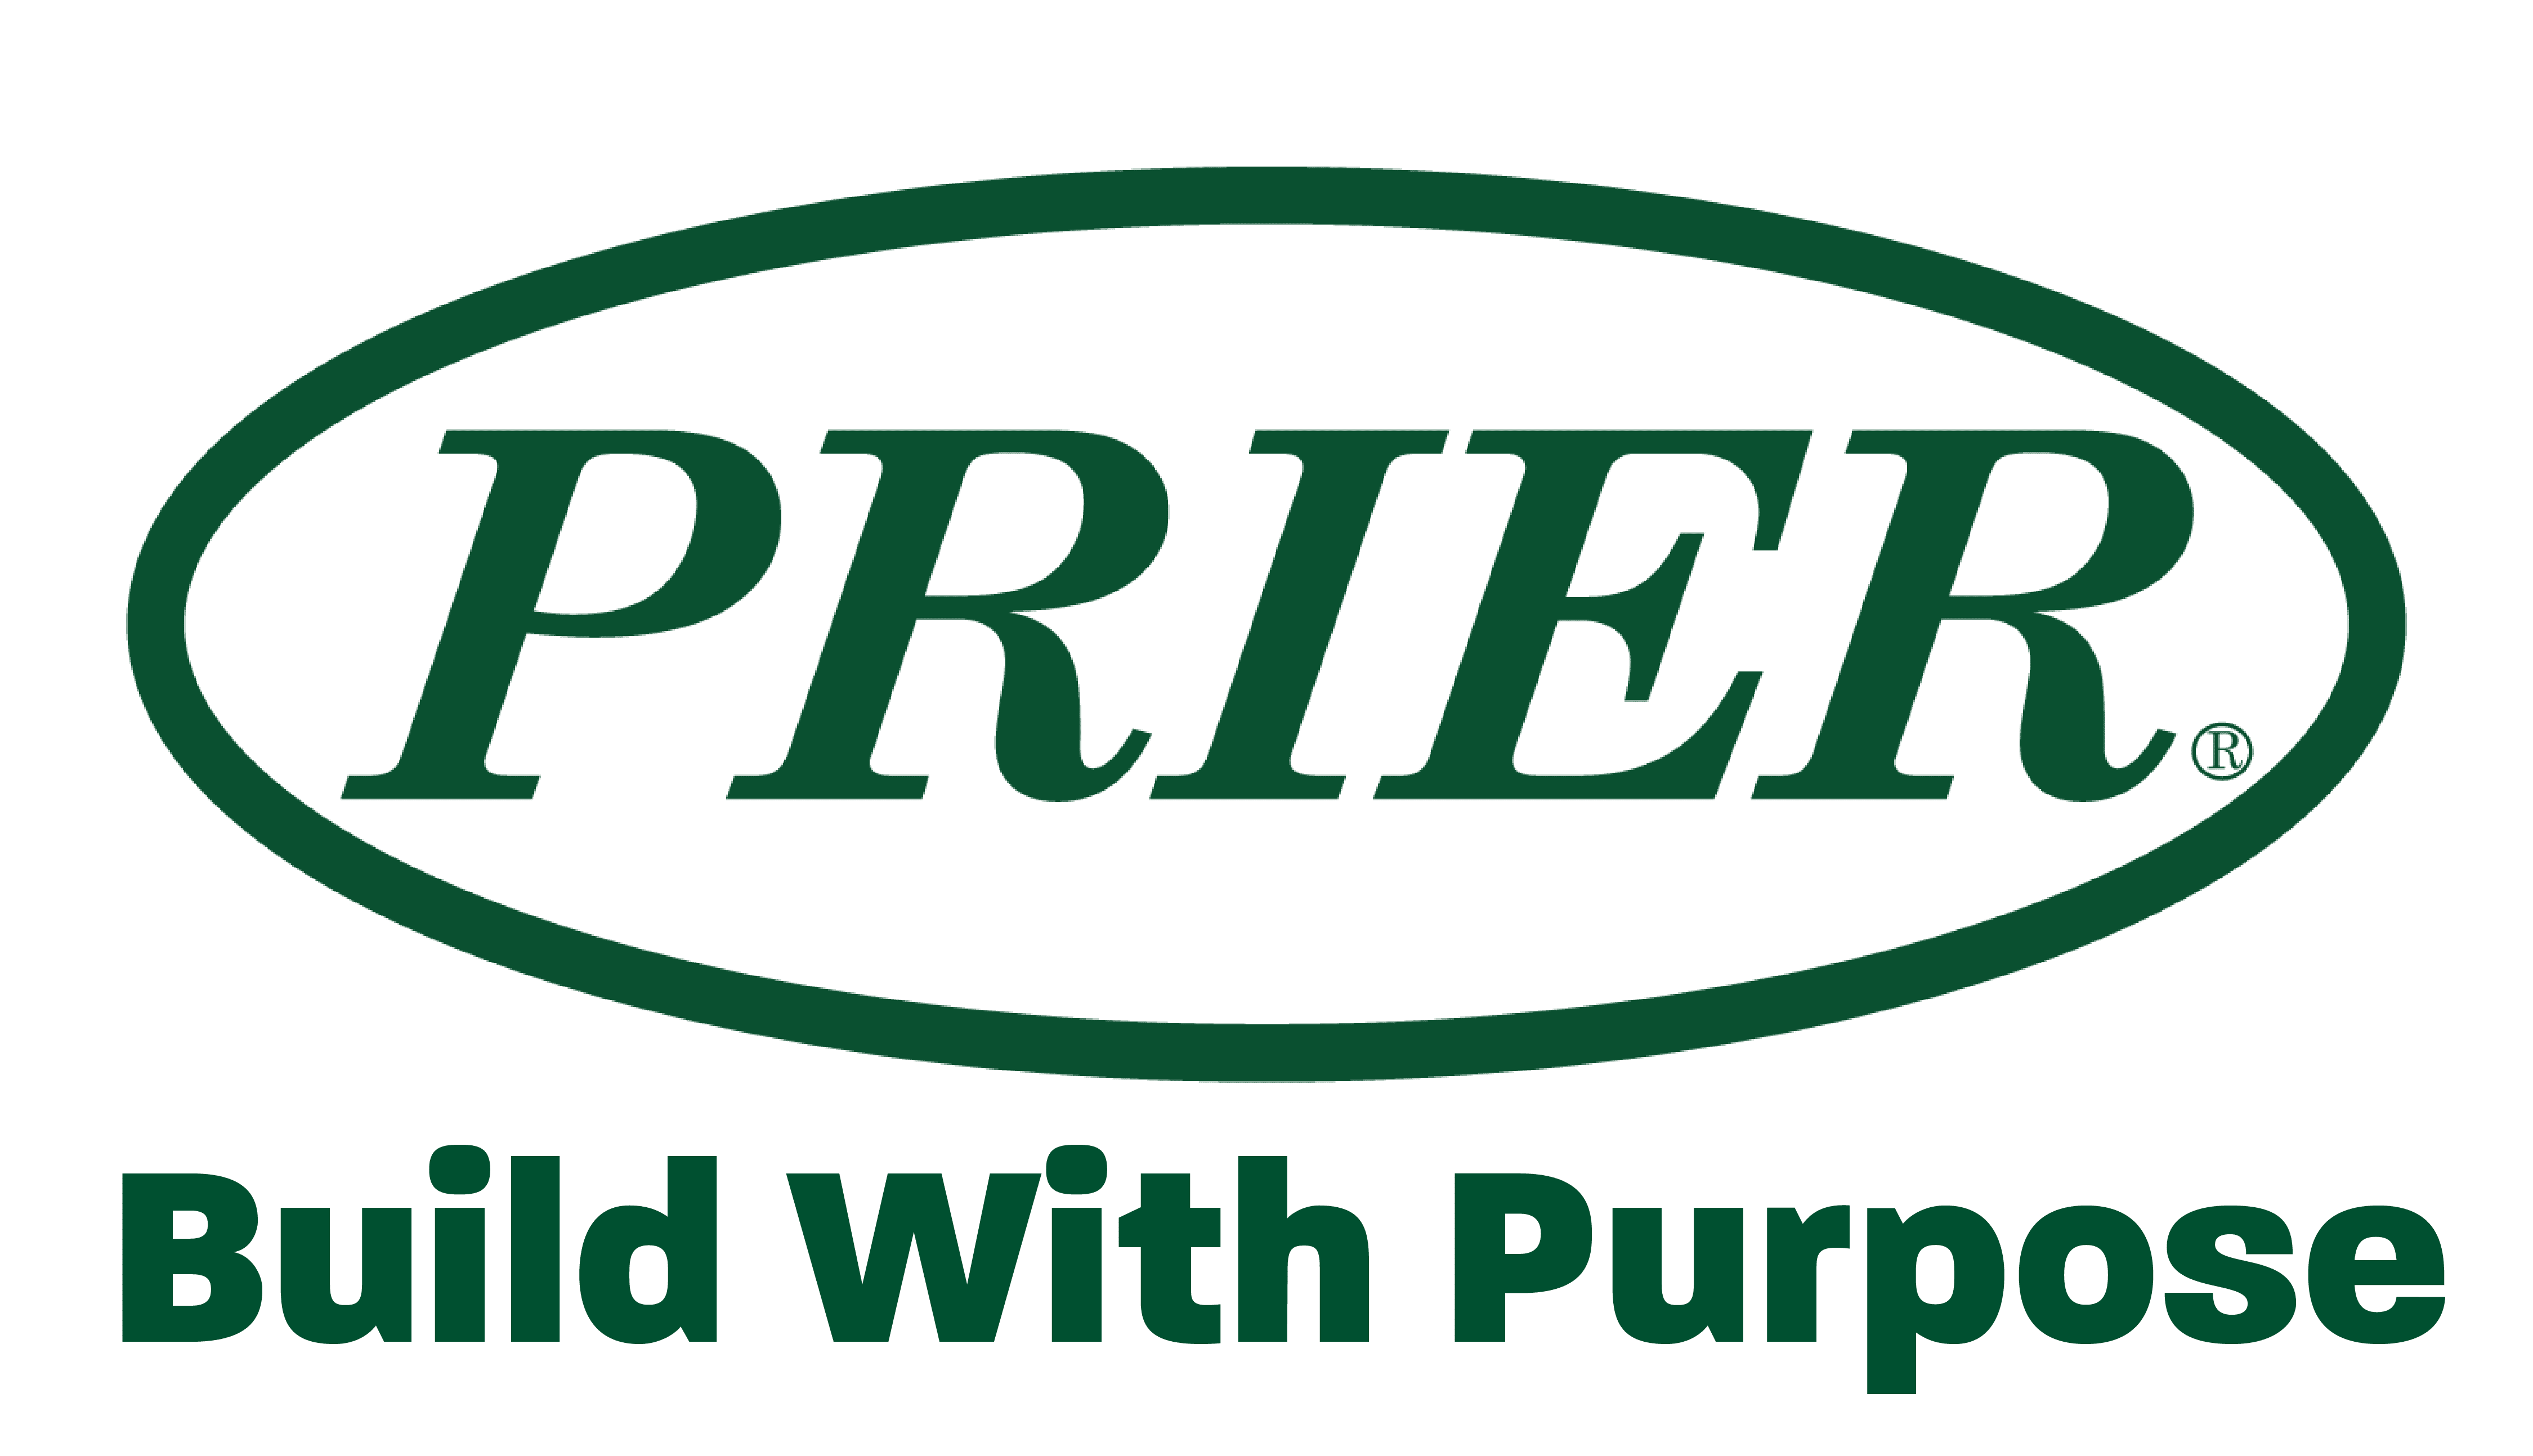 Prier Products